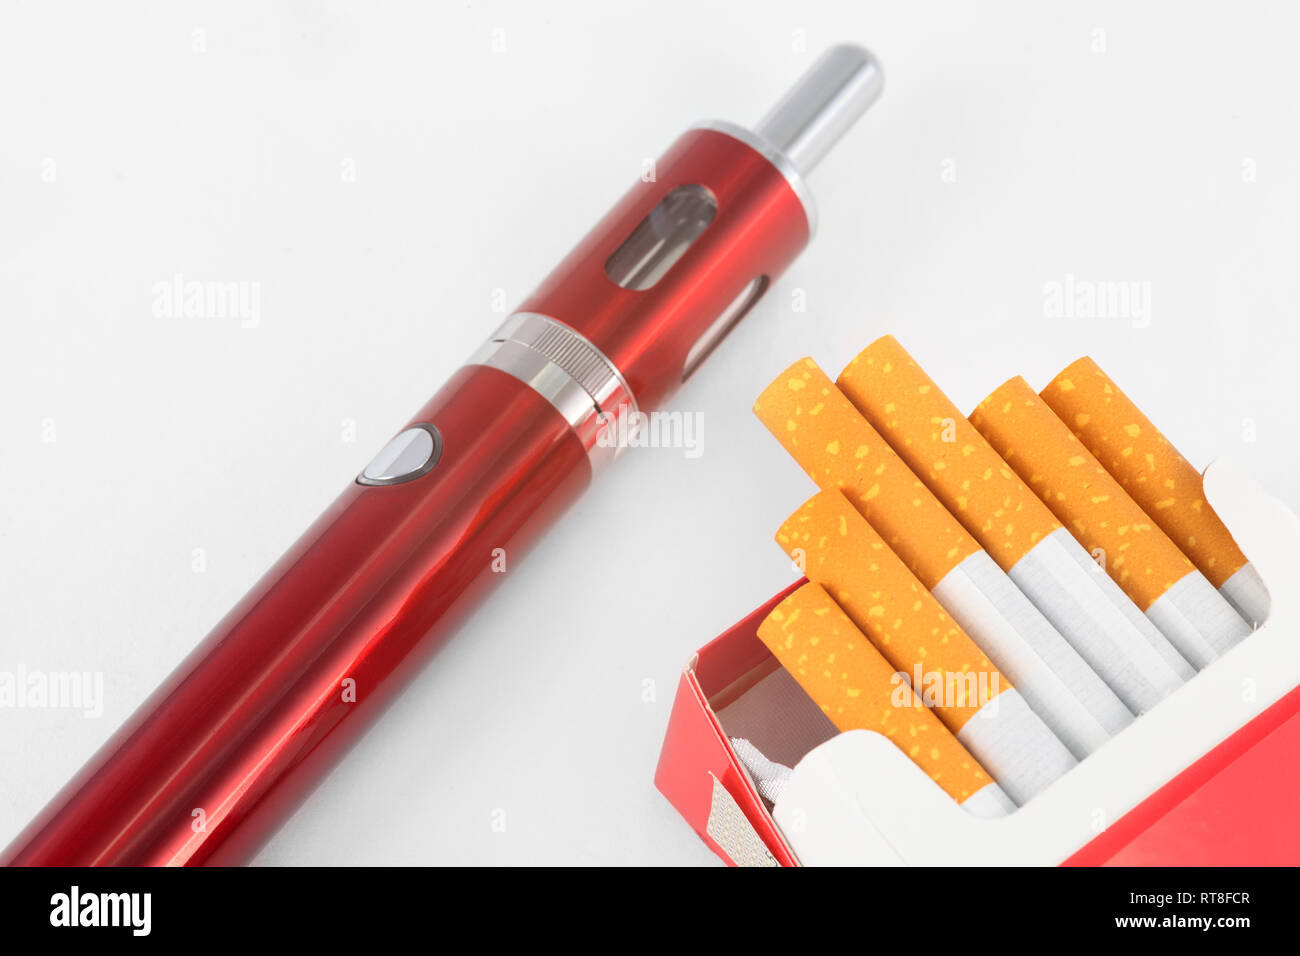 Expensive Cigarettes High Resolution Stock Photography and Images - Alamy